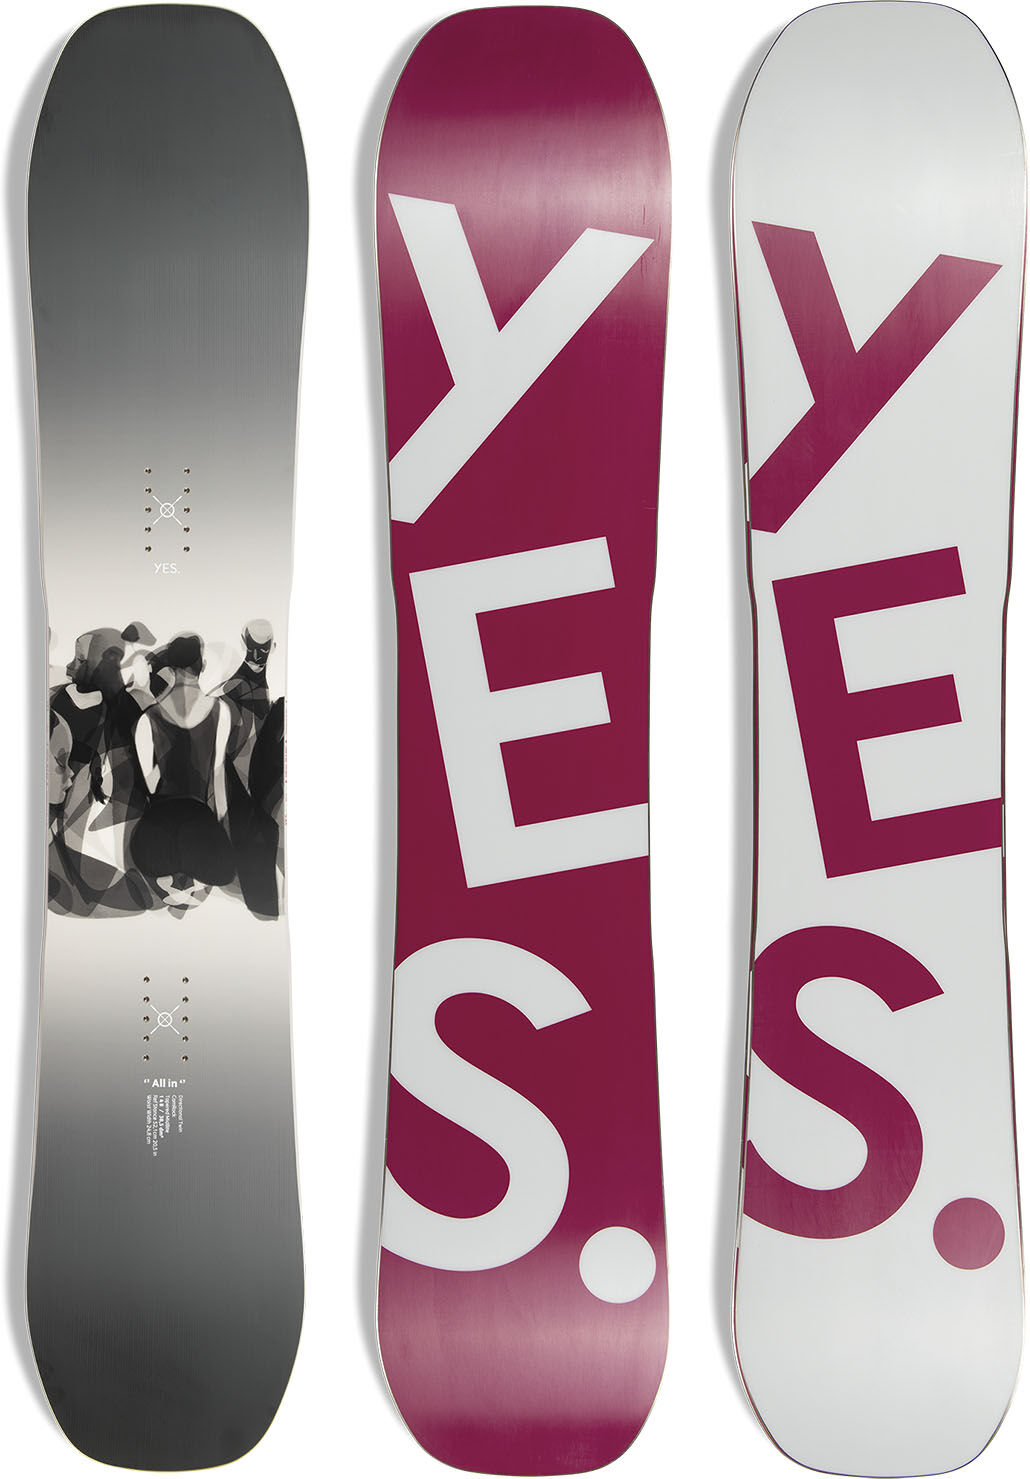 yes snowboard all in u 154